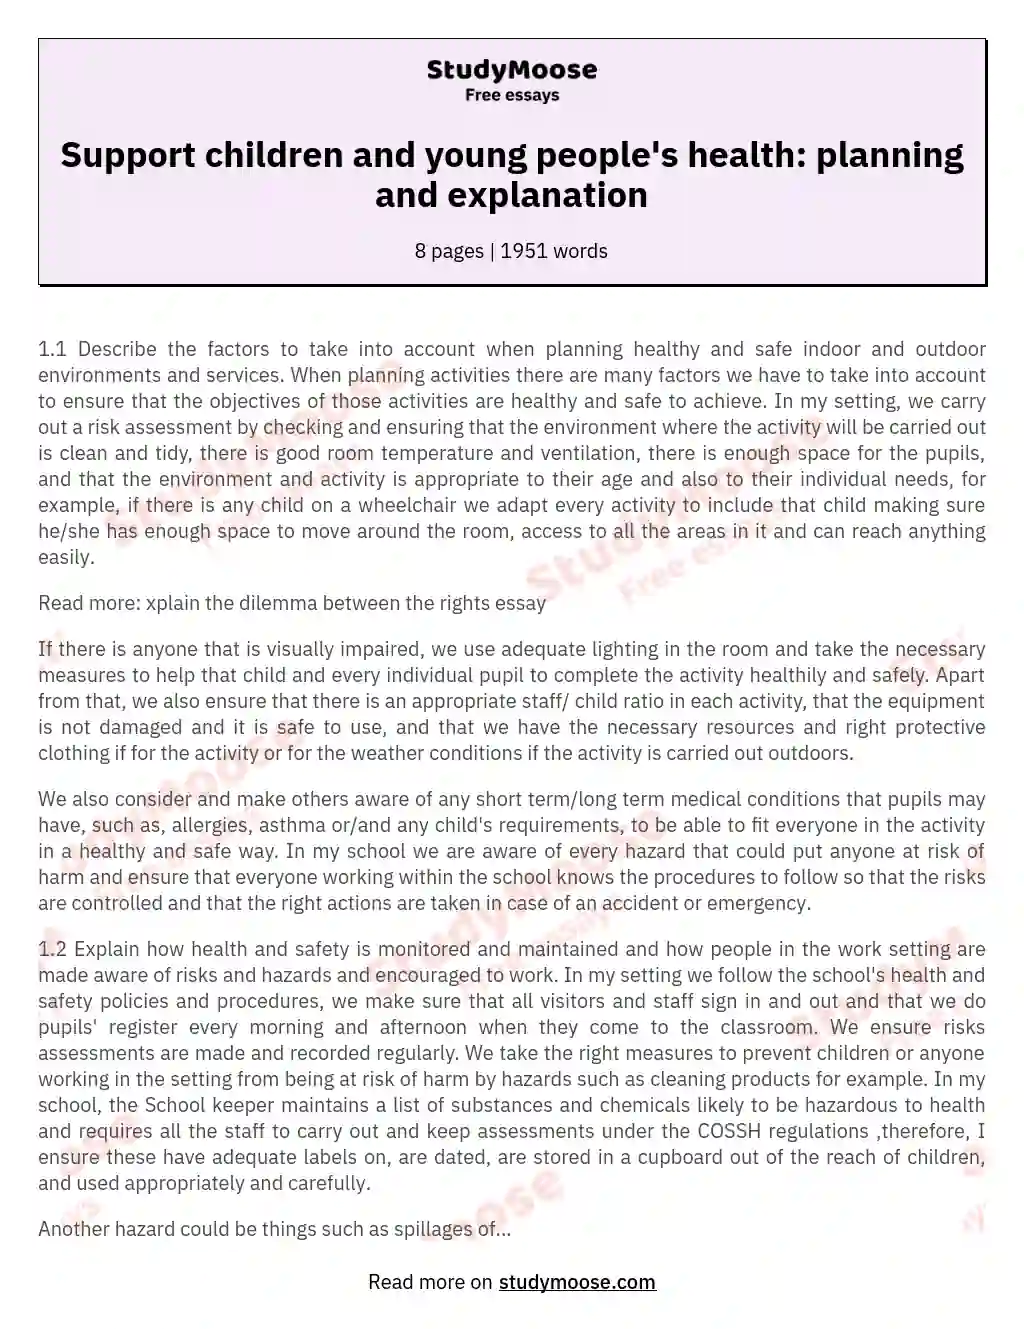 Support children and young people's health: planning and explanation essay